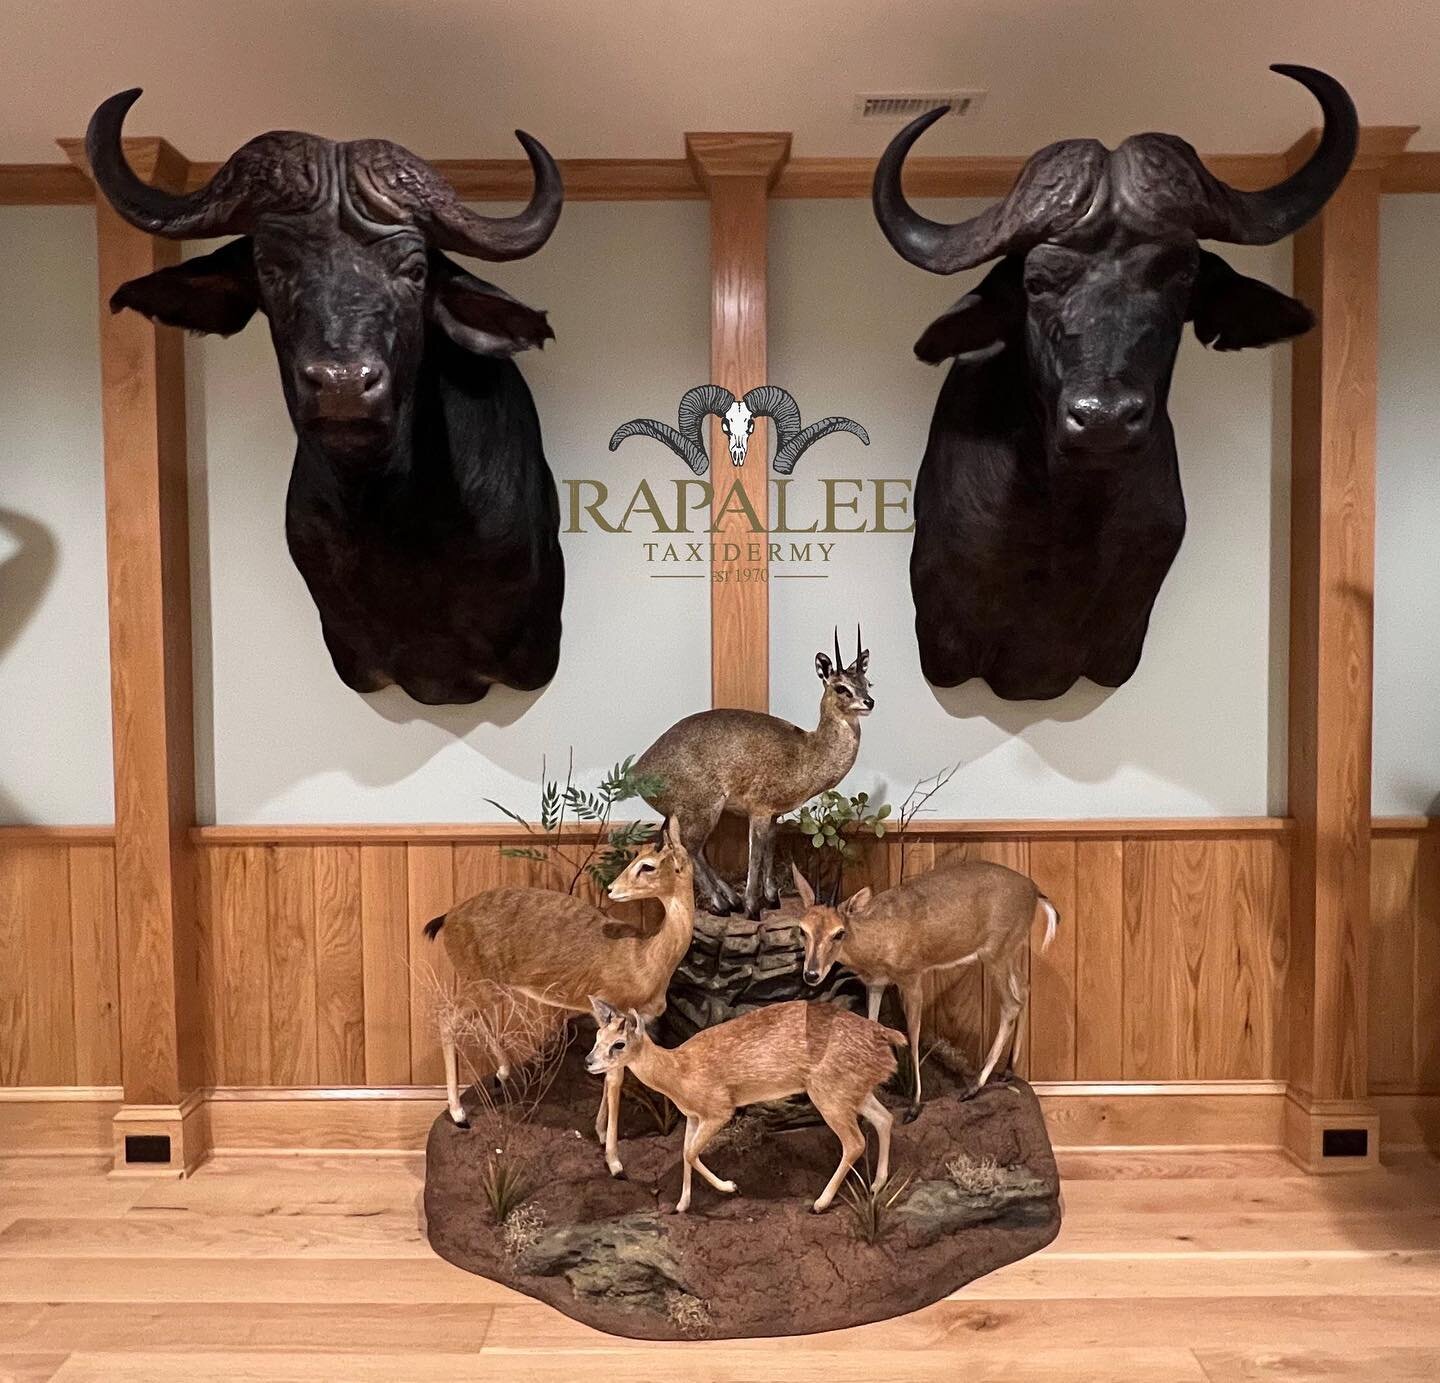 Here are a couple of mounts we recently installed in a clients room. Depending on your perspective of this display you could say &ldquo;the big guys are looking out for the little guys&rdquo; or maybe &ldquo;the little guys are watching out for the b